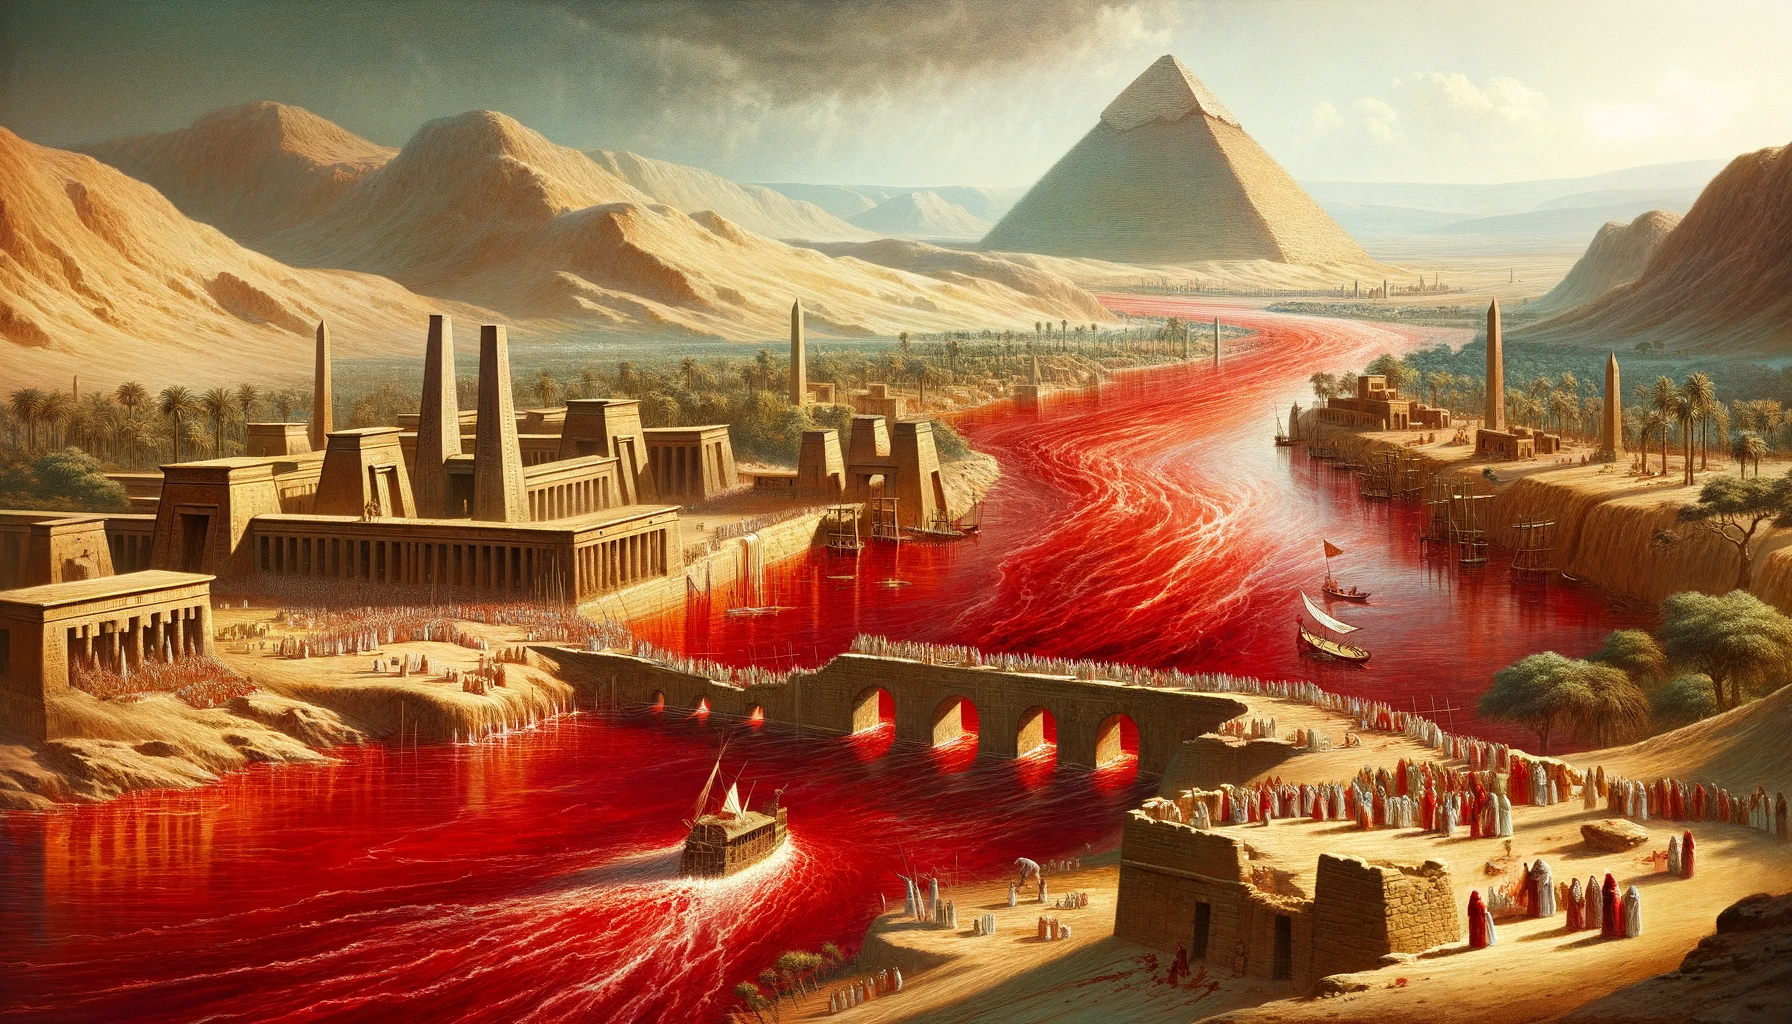 Ark.au Illustrated Bible - Exodus 7:20 - Moses and Aaron did so, as Yahweh commanded; and he lifted up the rod, and struck the waters that were in the river, in the sight of Pharaoh, and in the sight of his servants; and all the waters that were in the river were turned to blood.